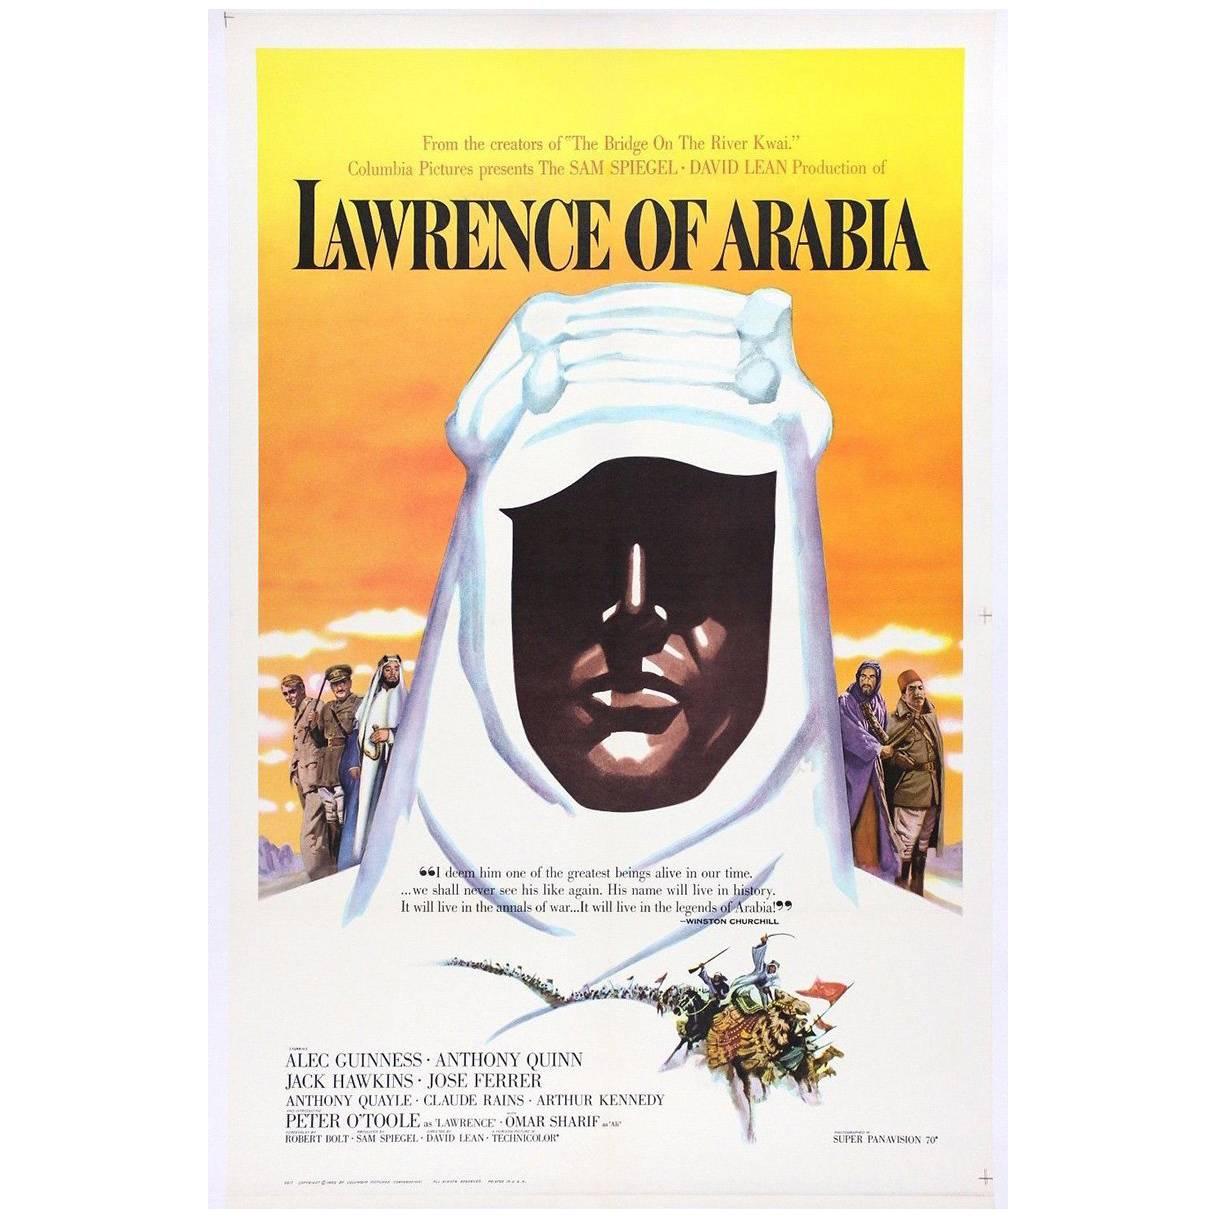 "Lawrence Of Arabia" Film Poster, 1962